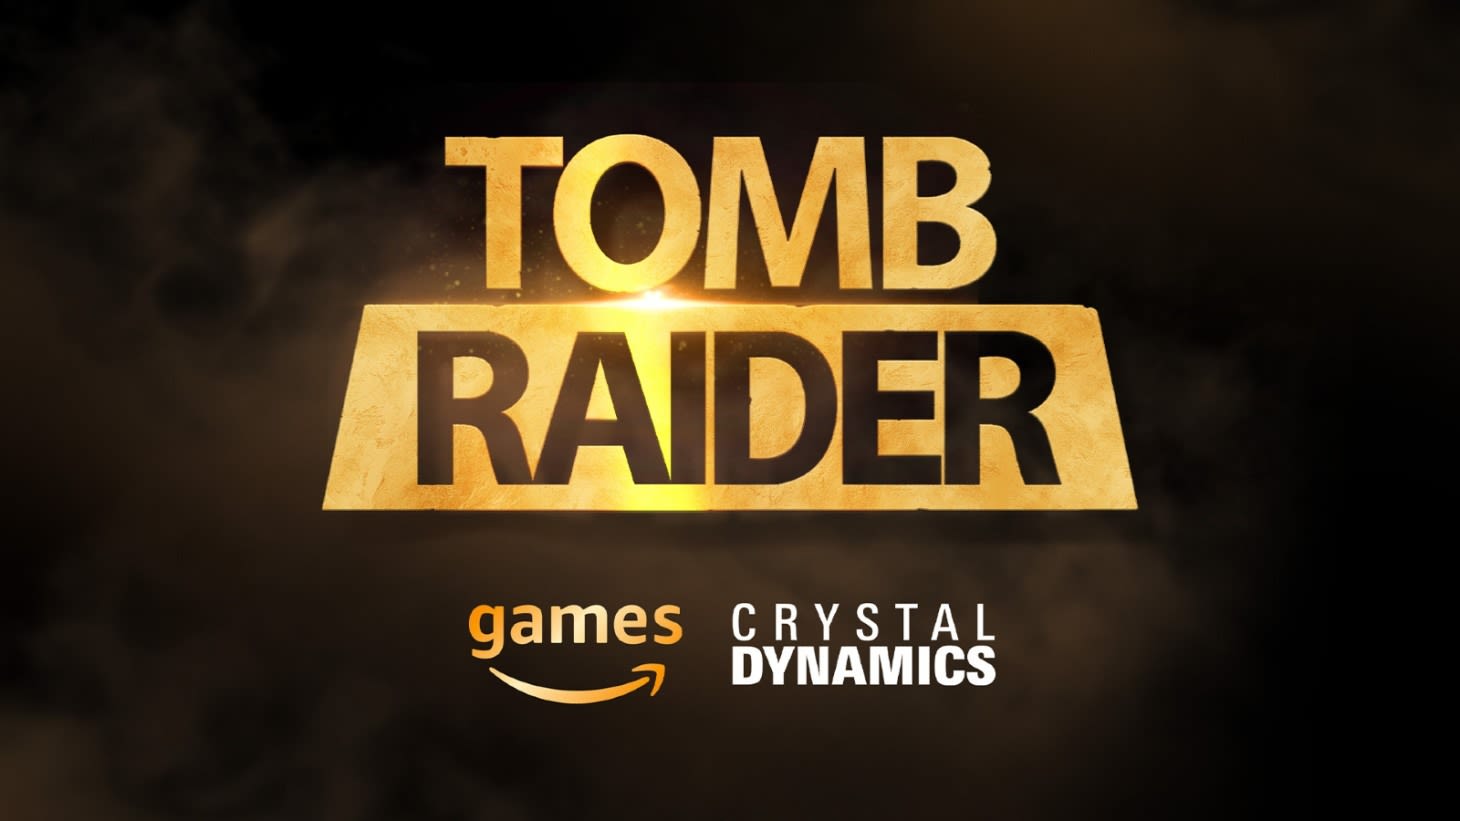 Tomb Raider: Prime Video Orders Series Based on Iconic Video Game